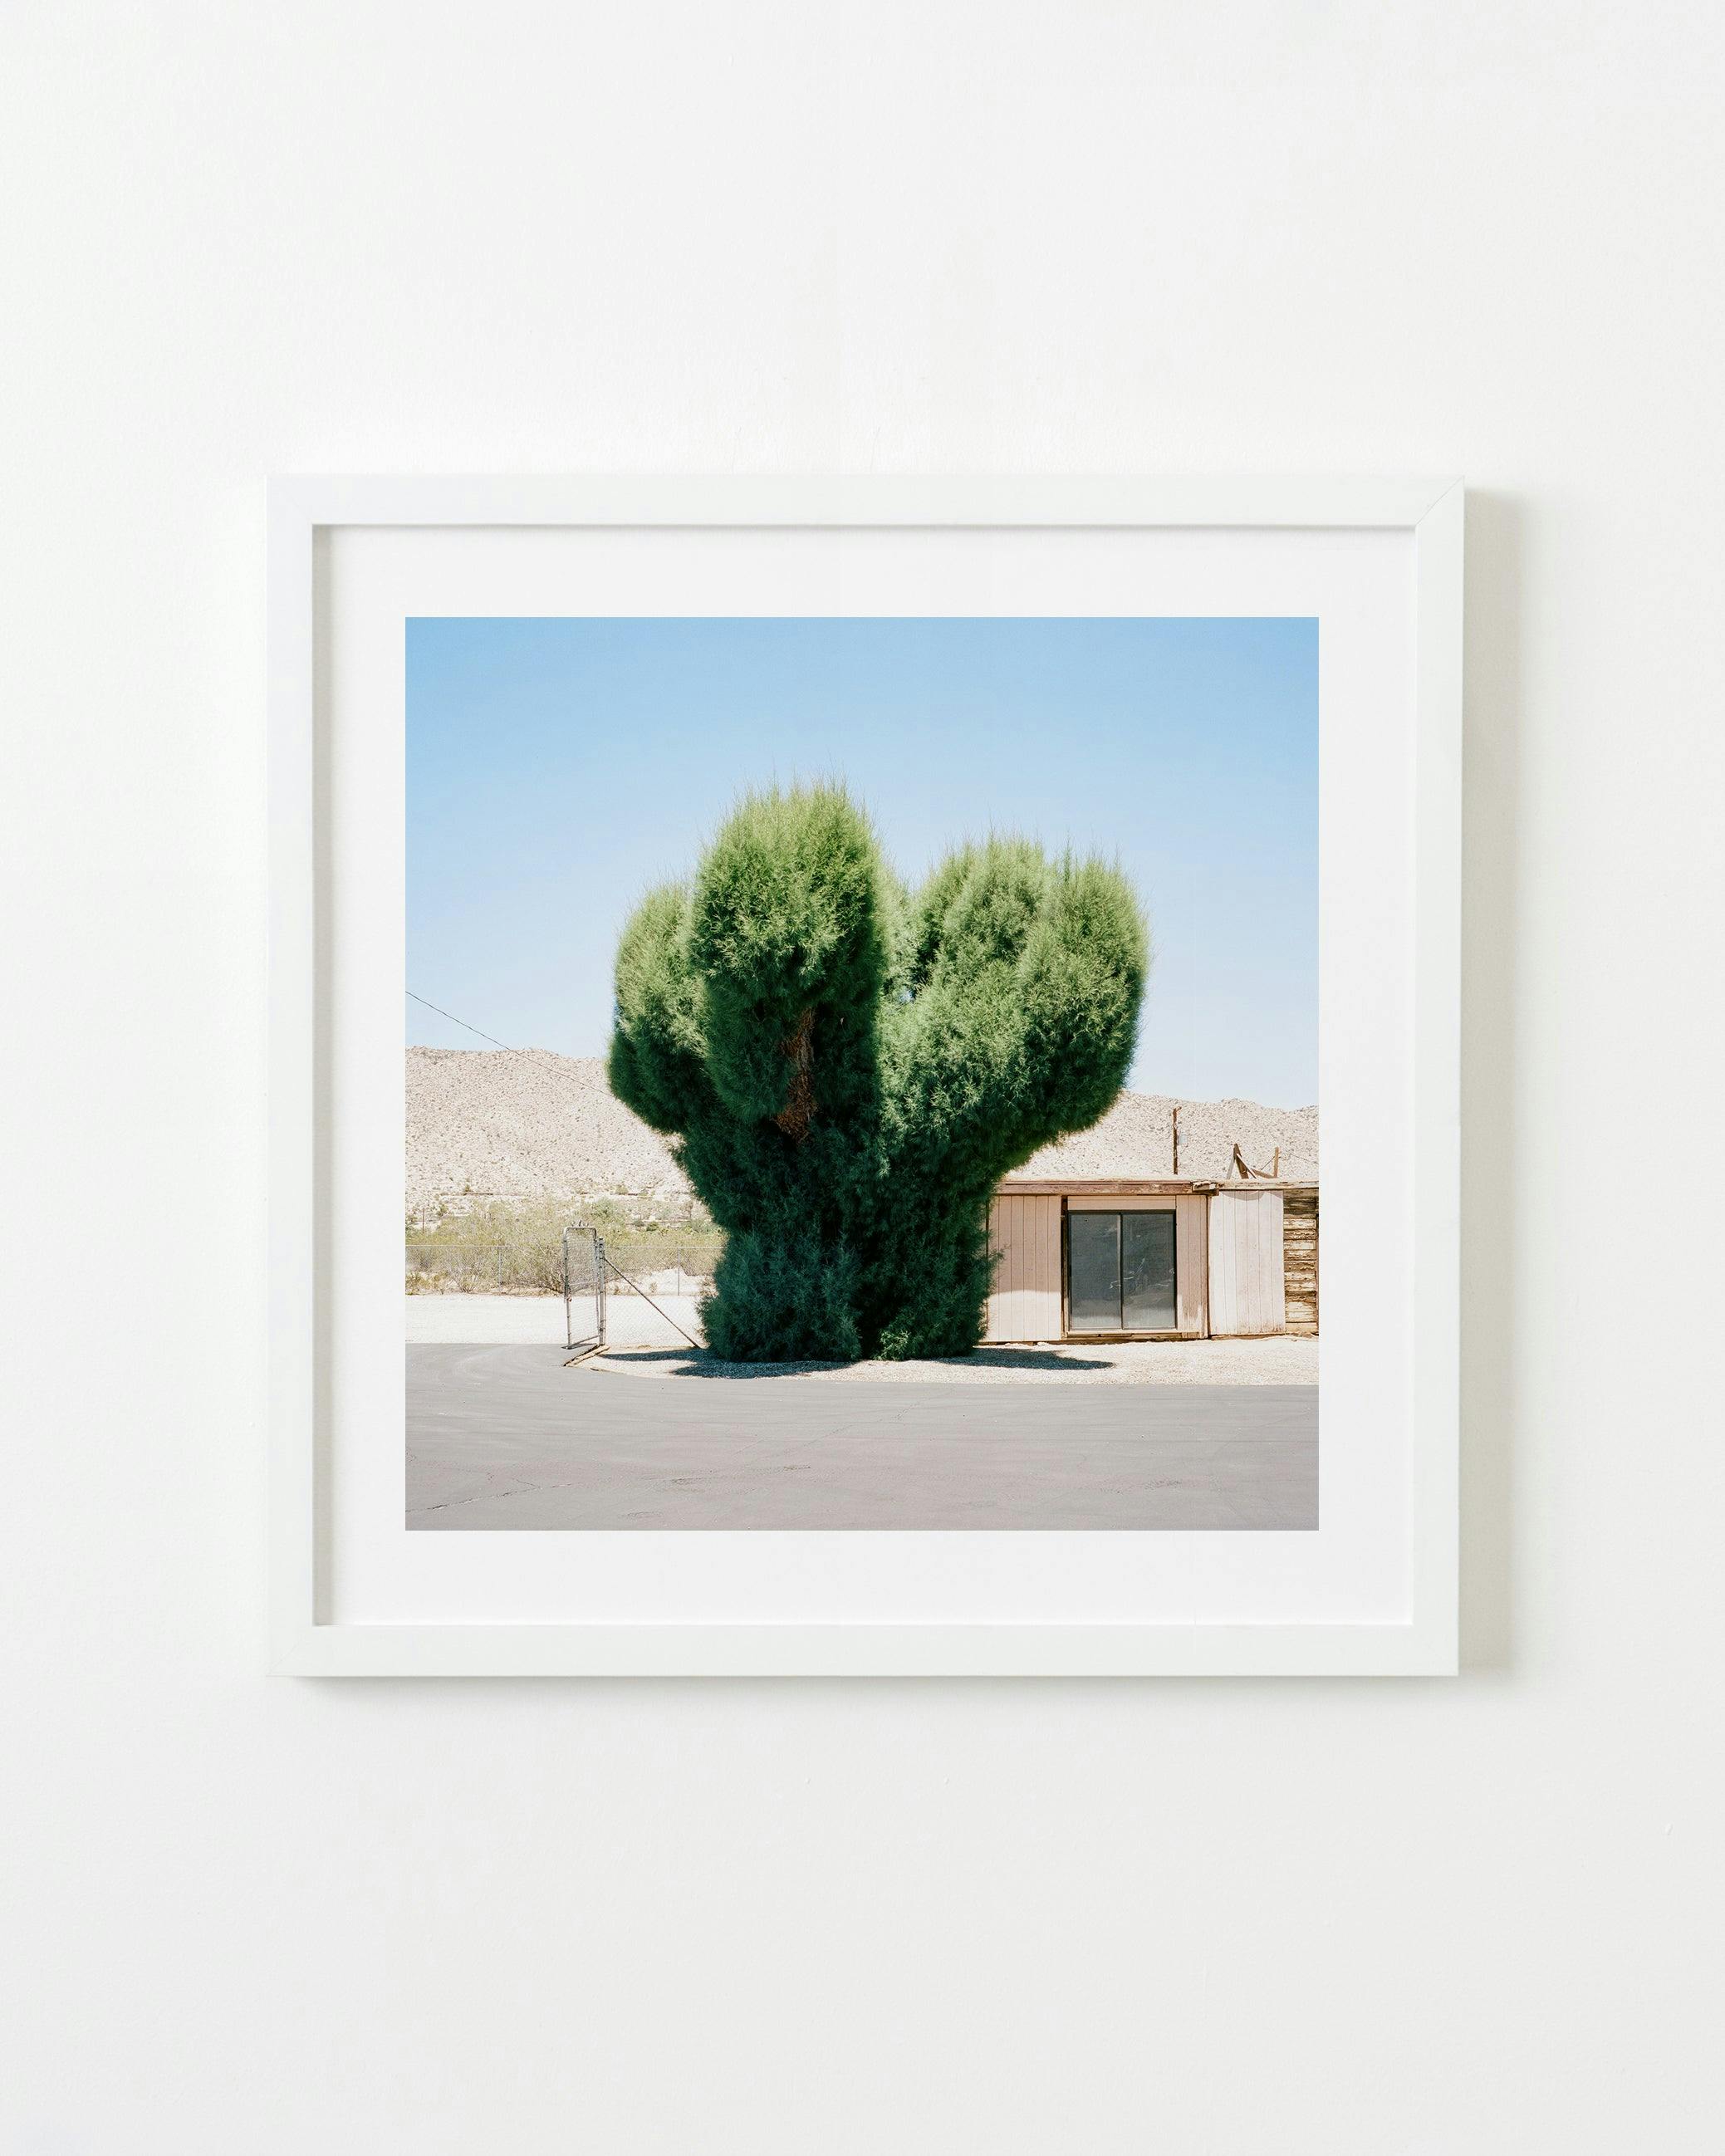 Photography by Sinziana Velicescu titled "Yucca Valley, CA".